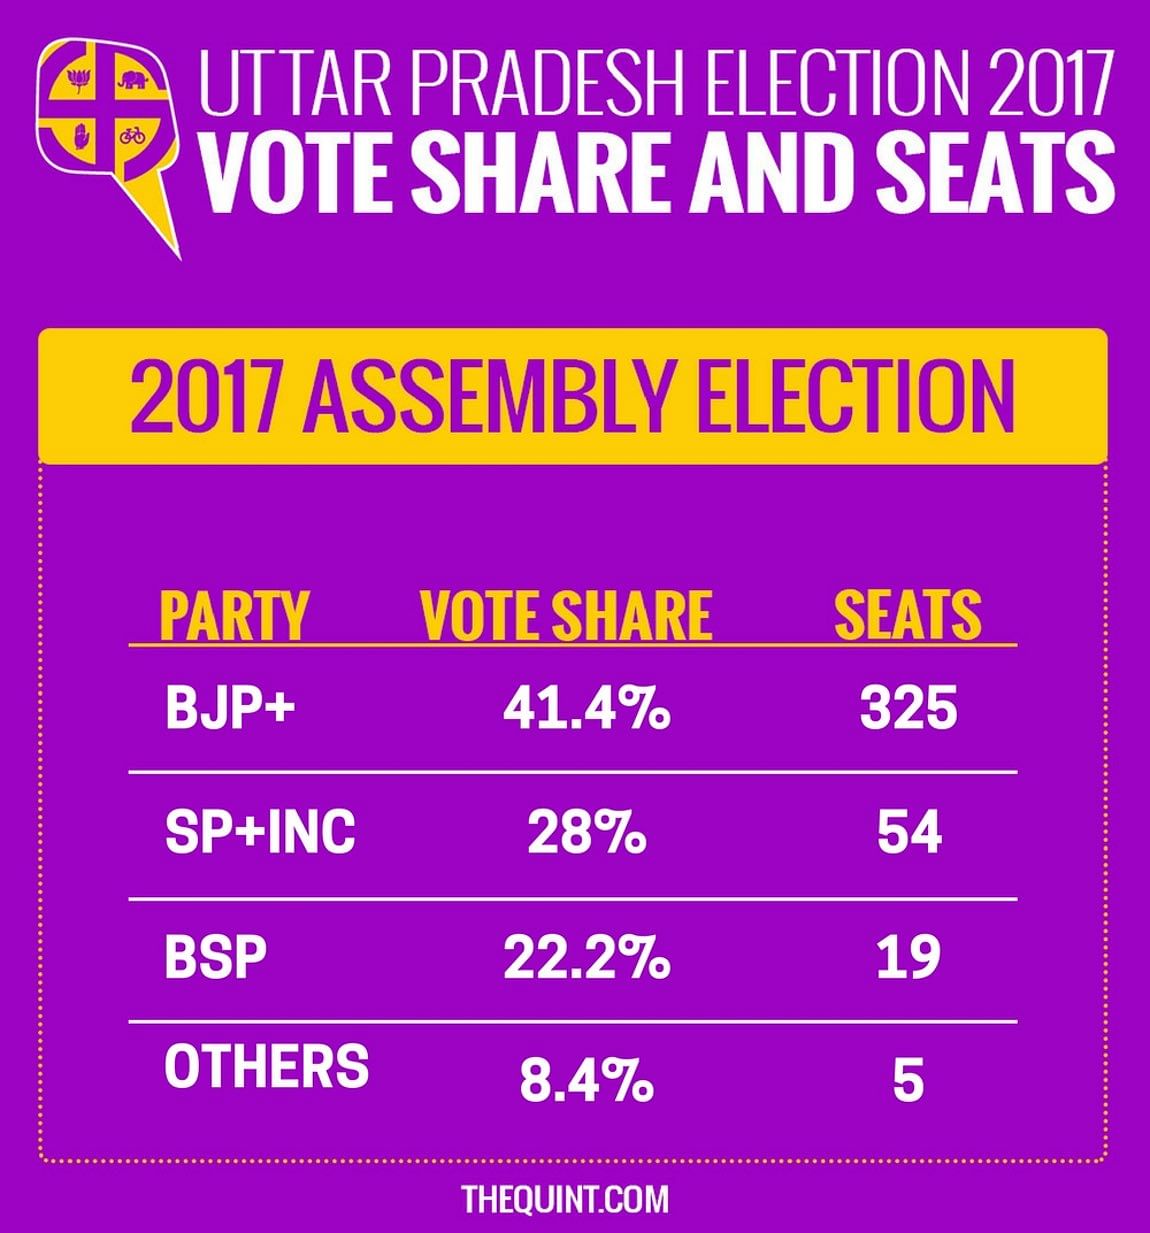 Live updates of Assembly Elections 2017 results from Uttar Pradesh, Punjab, Uttarakhand, Goa and Manipur.